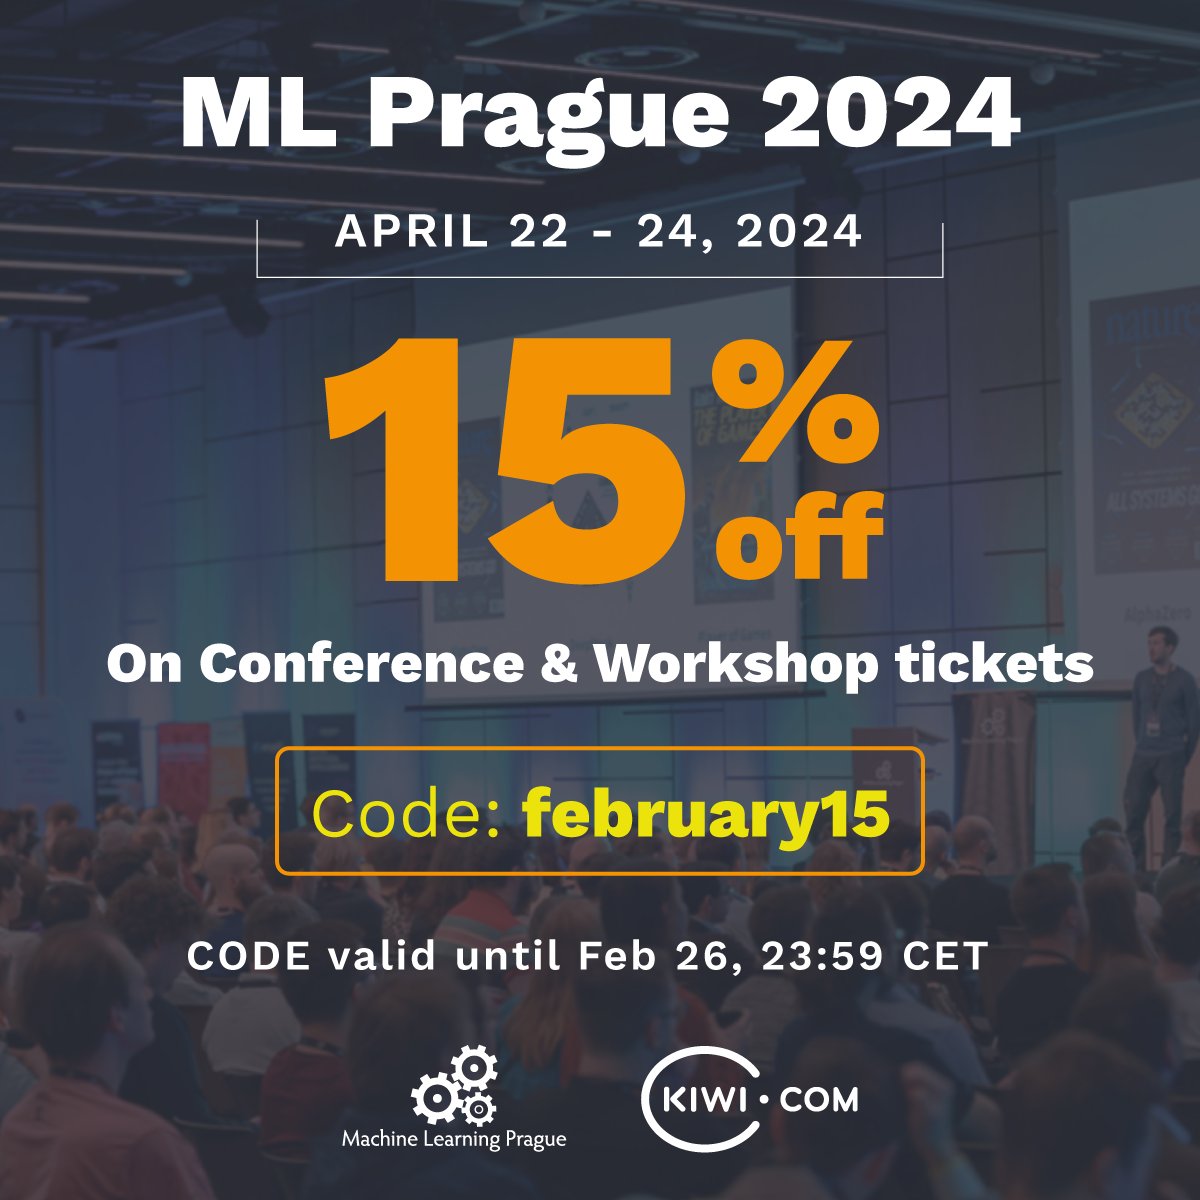 📣 Last sales of this year! Save up to €73 on your tickets using the code 'february15' at the checkout. 
⏳ Code valid until February 26, 2024, 23:59 CET.
👉 Register at mlprague.com

#mlprague #mlprague2024 #machinelearning #AI #conferences2024 #conference #workshops…